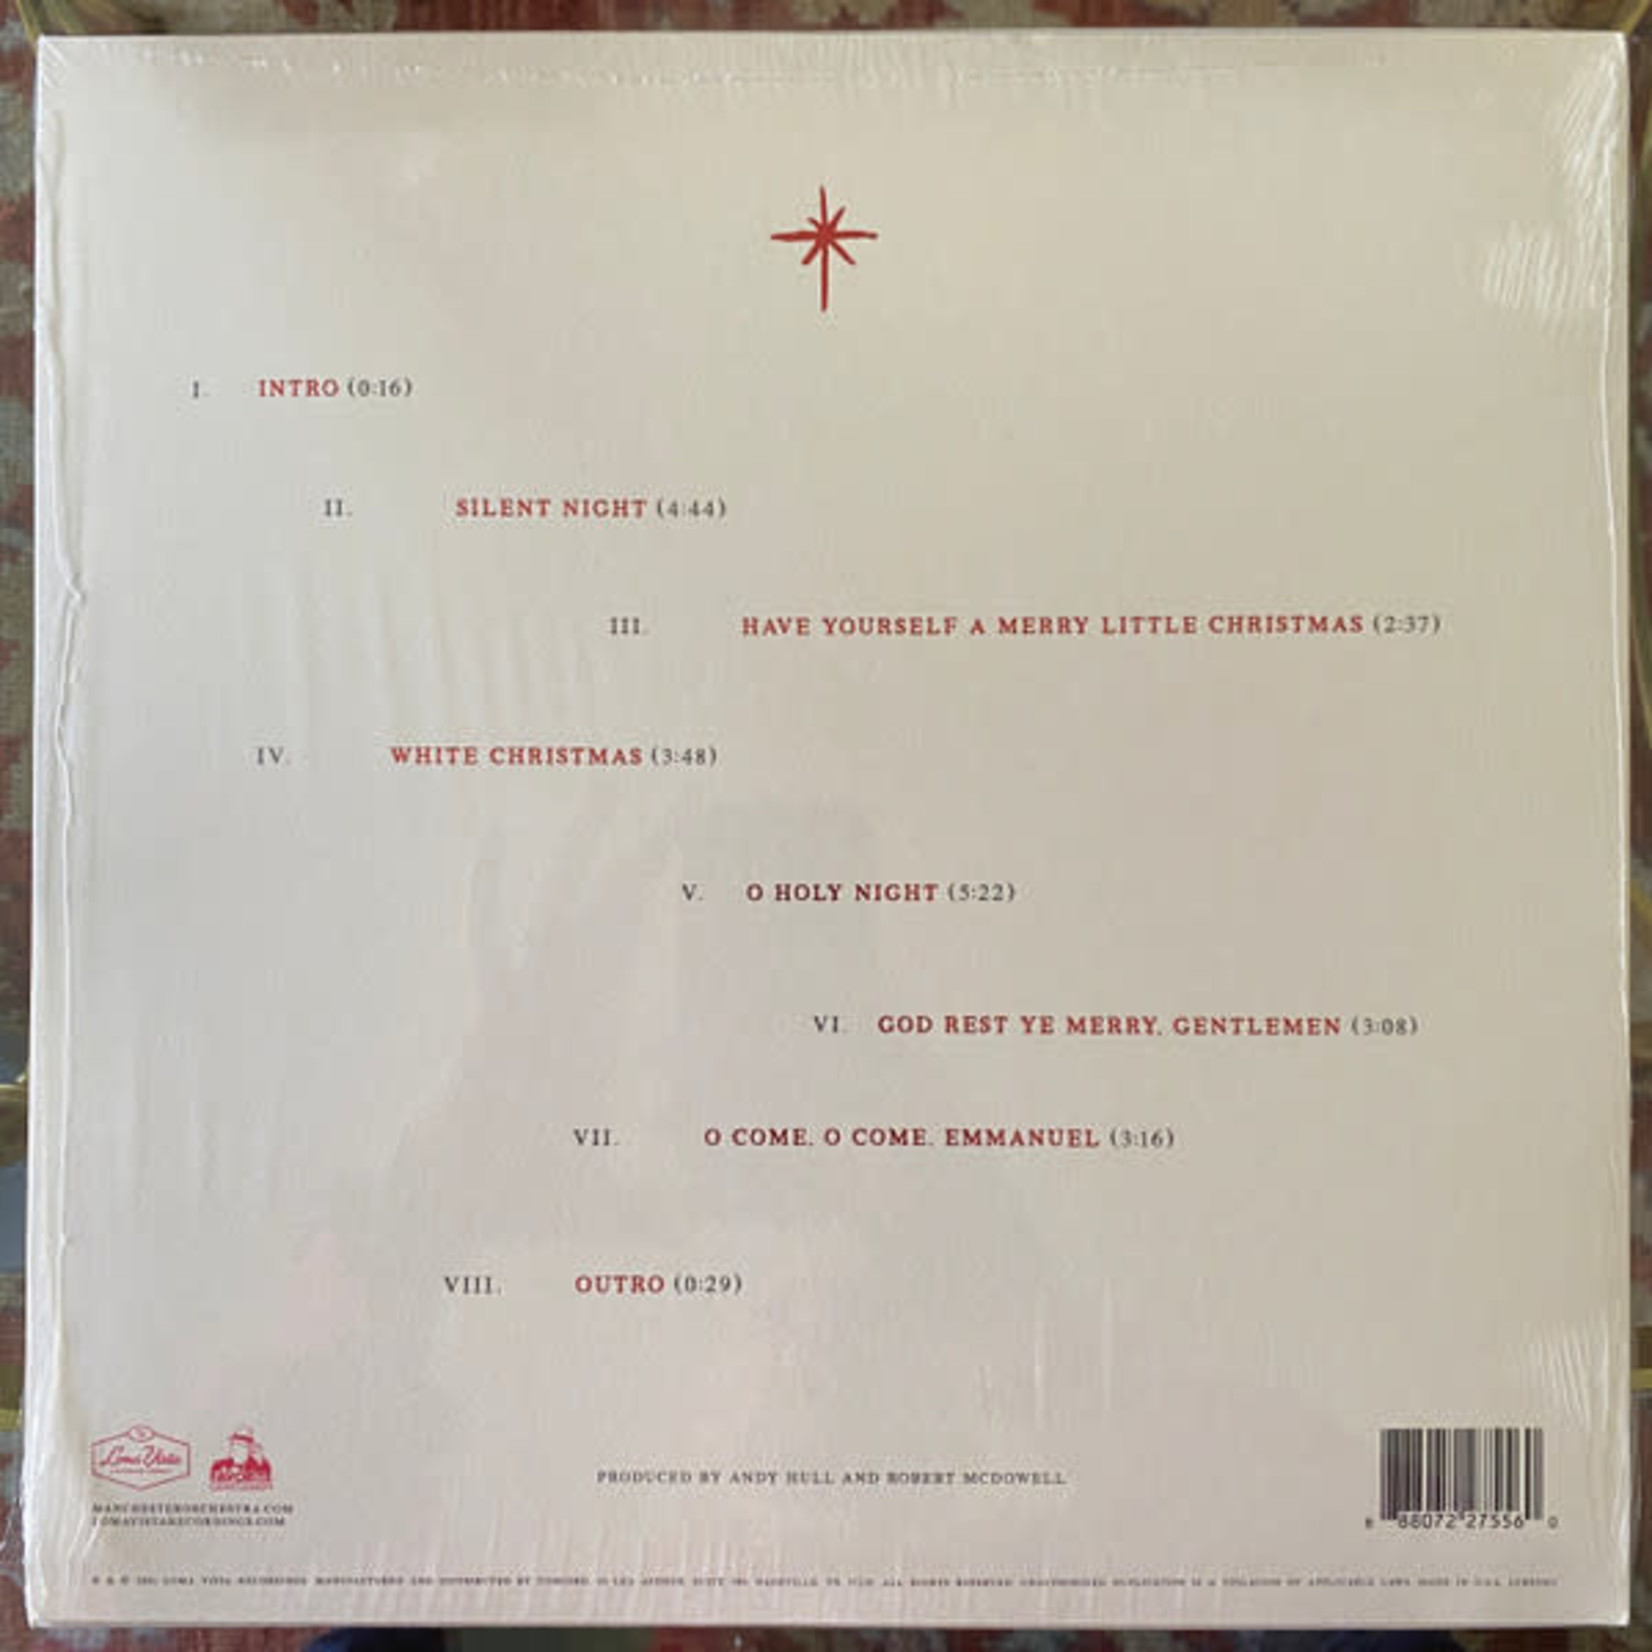 Loma Vista Manchester Orchestra - Christmas Songs Vol 1 (LP) [Red]